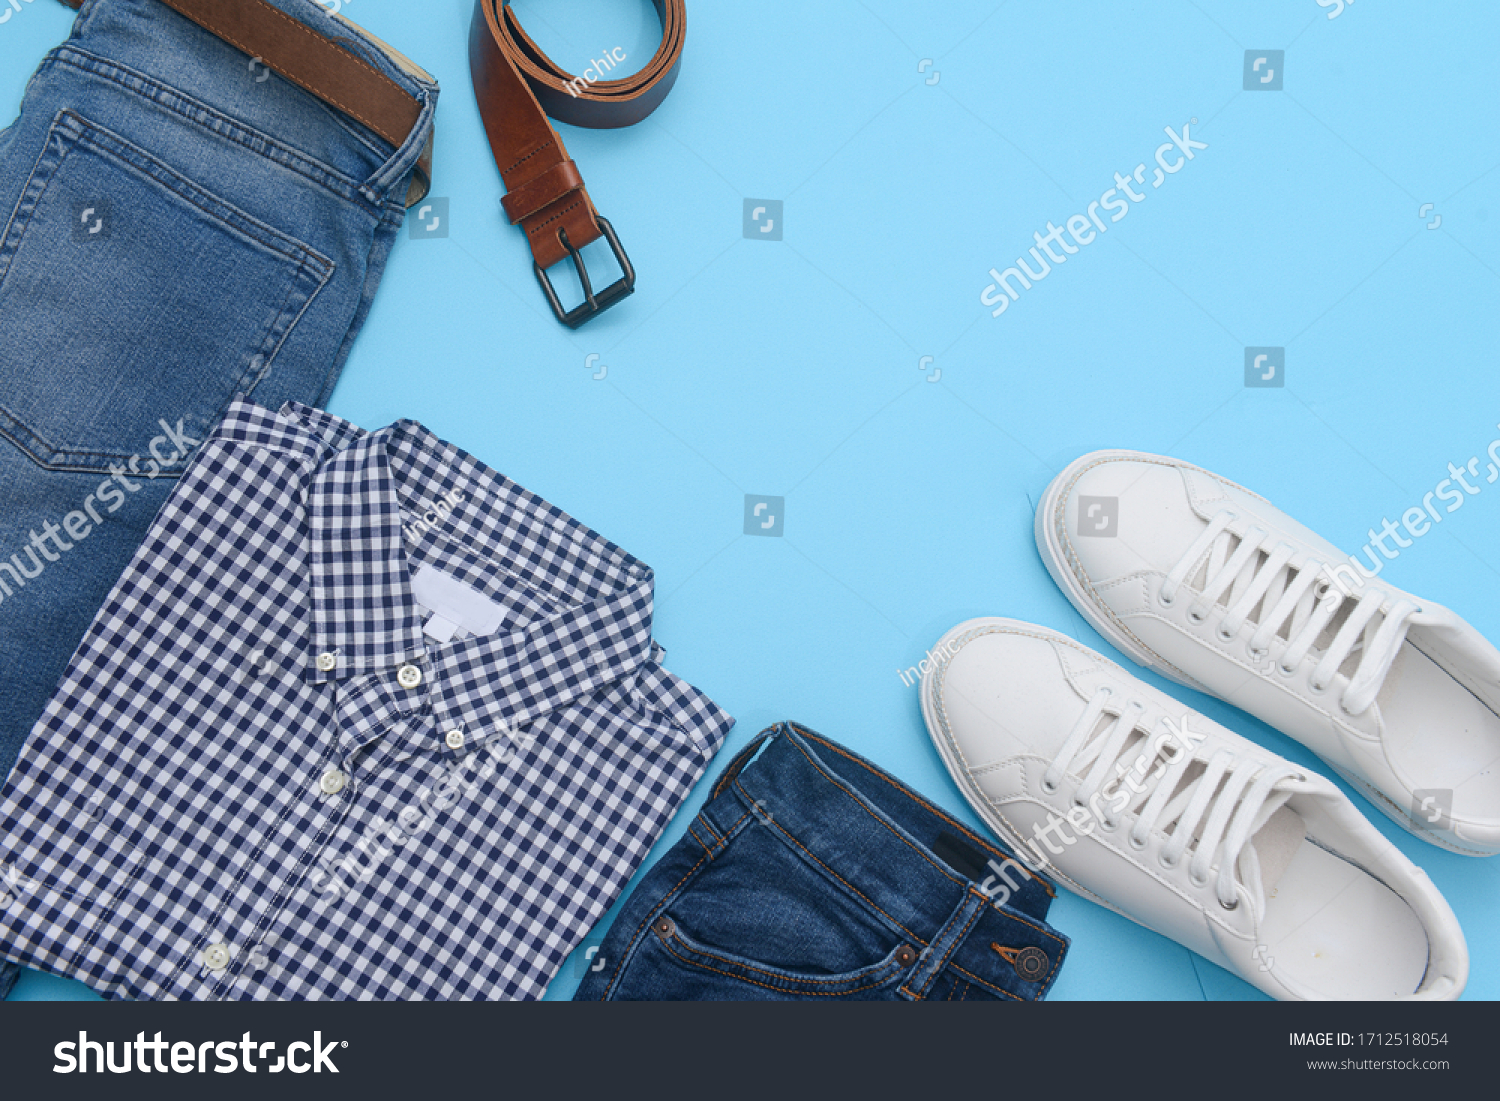 85,955 Jeans and sneakers Images, Stock Photos & Vectors | Shutterstock